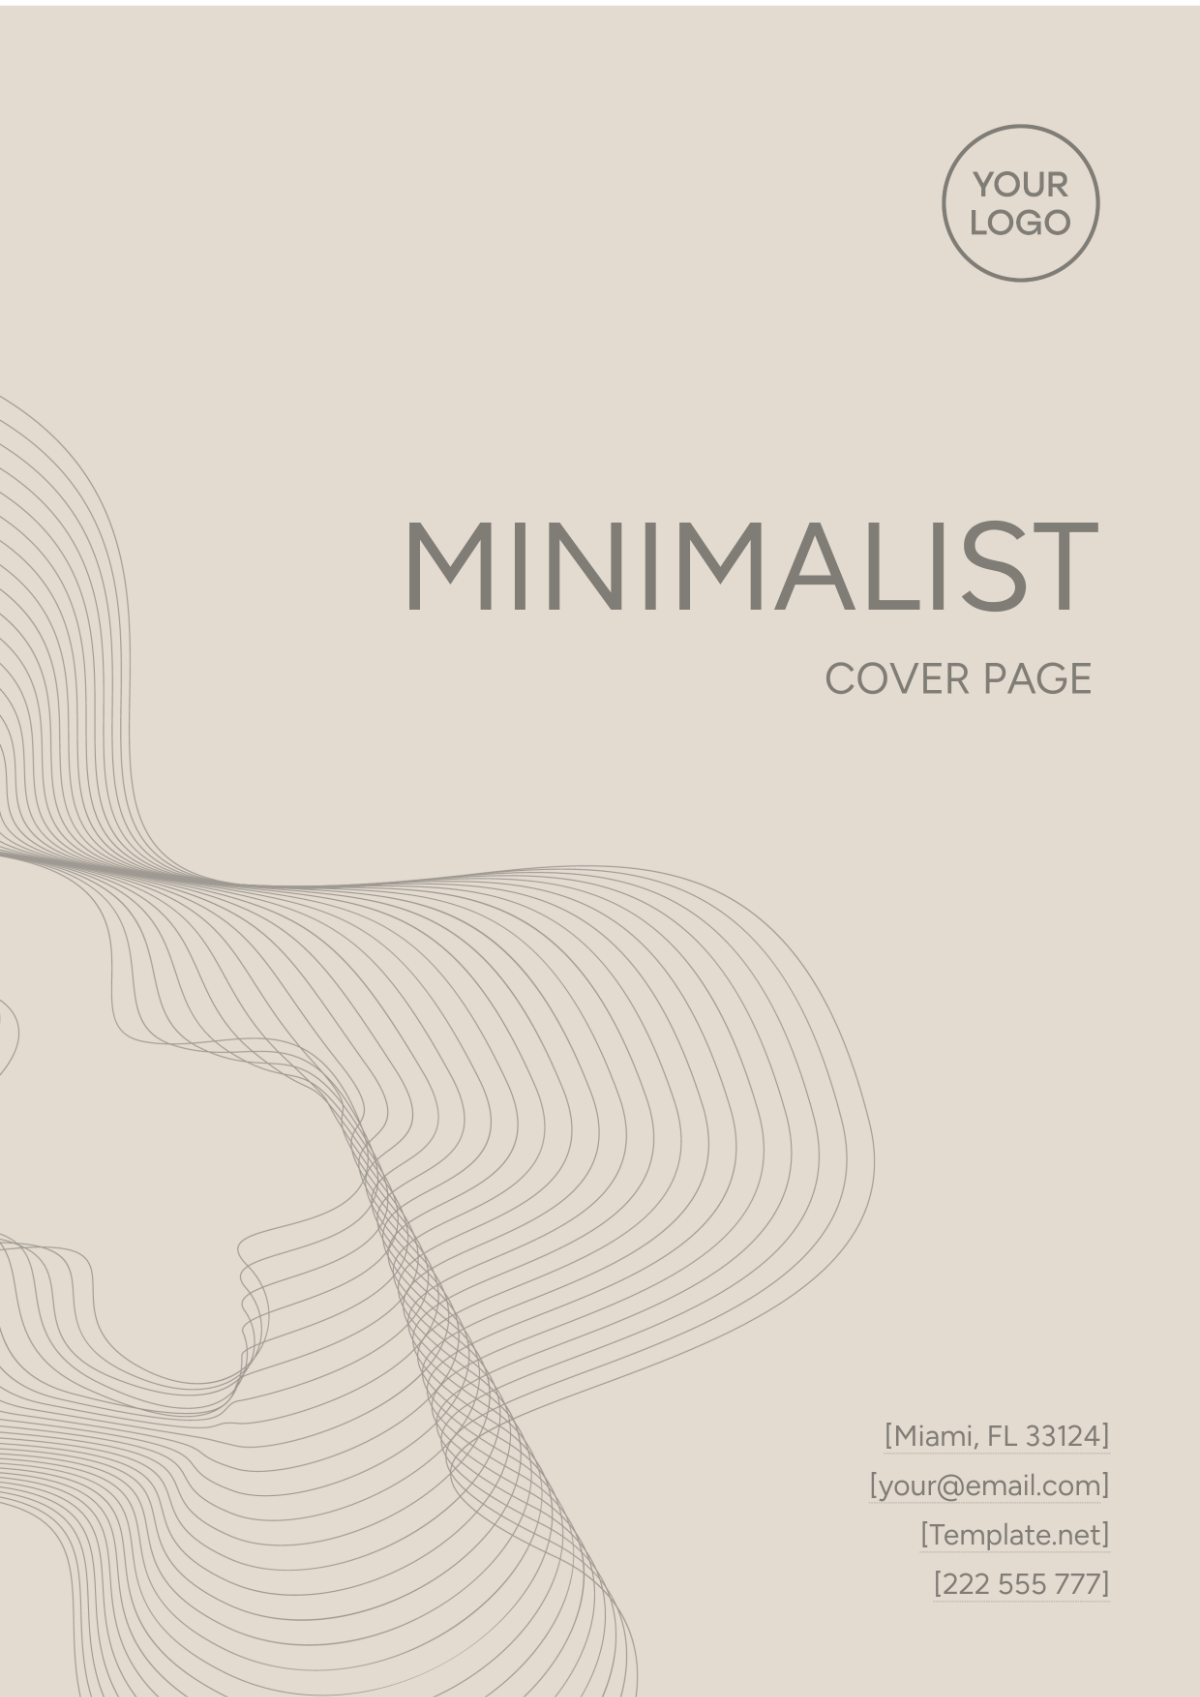 Minimalist Cover Page Image Template